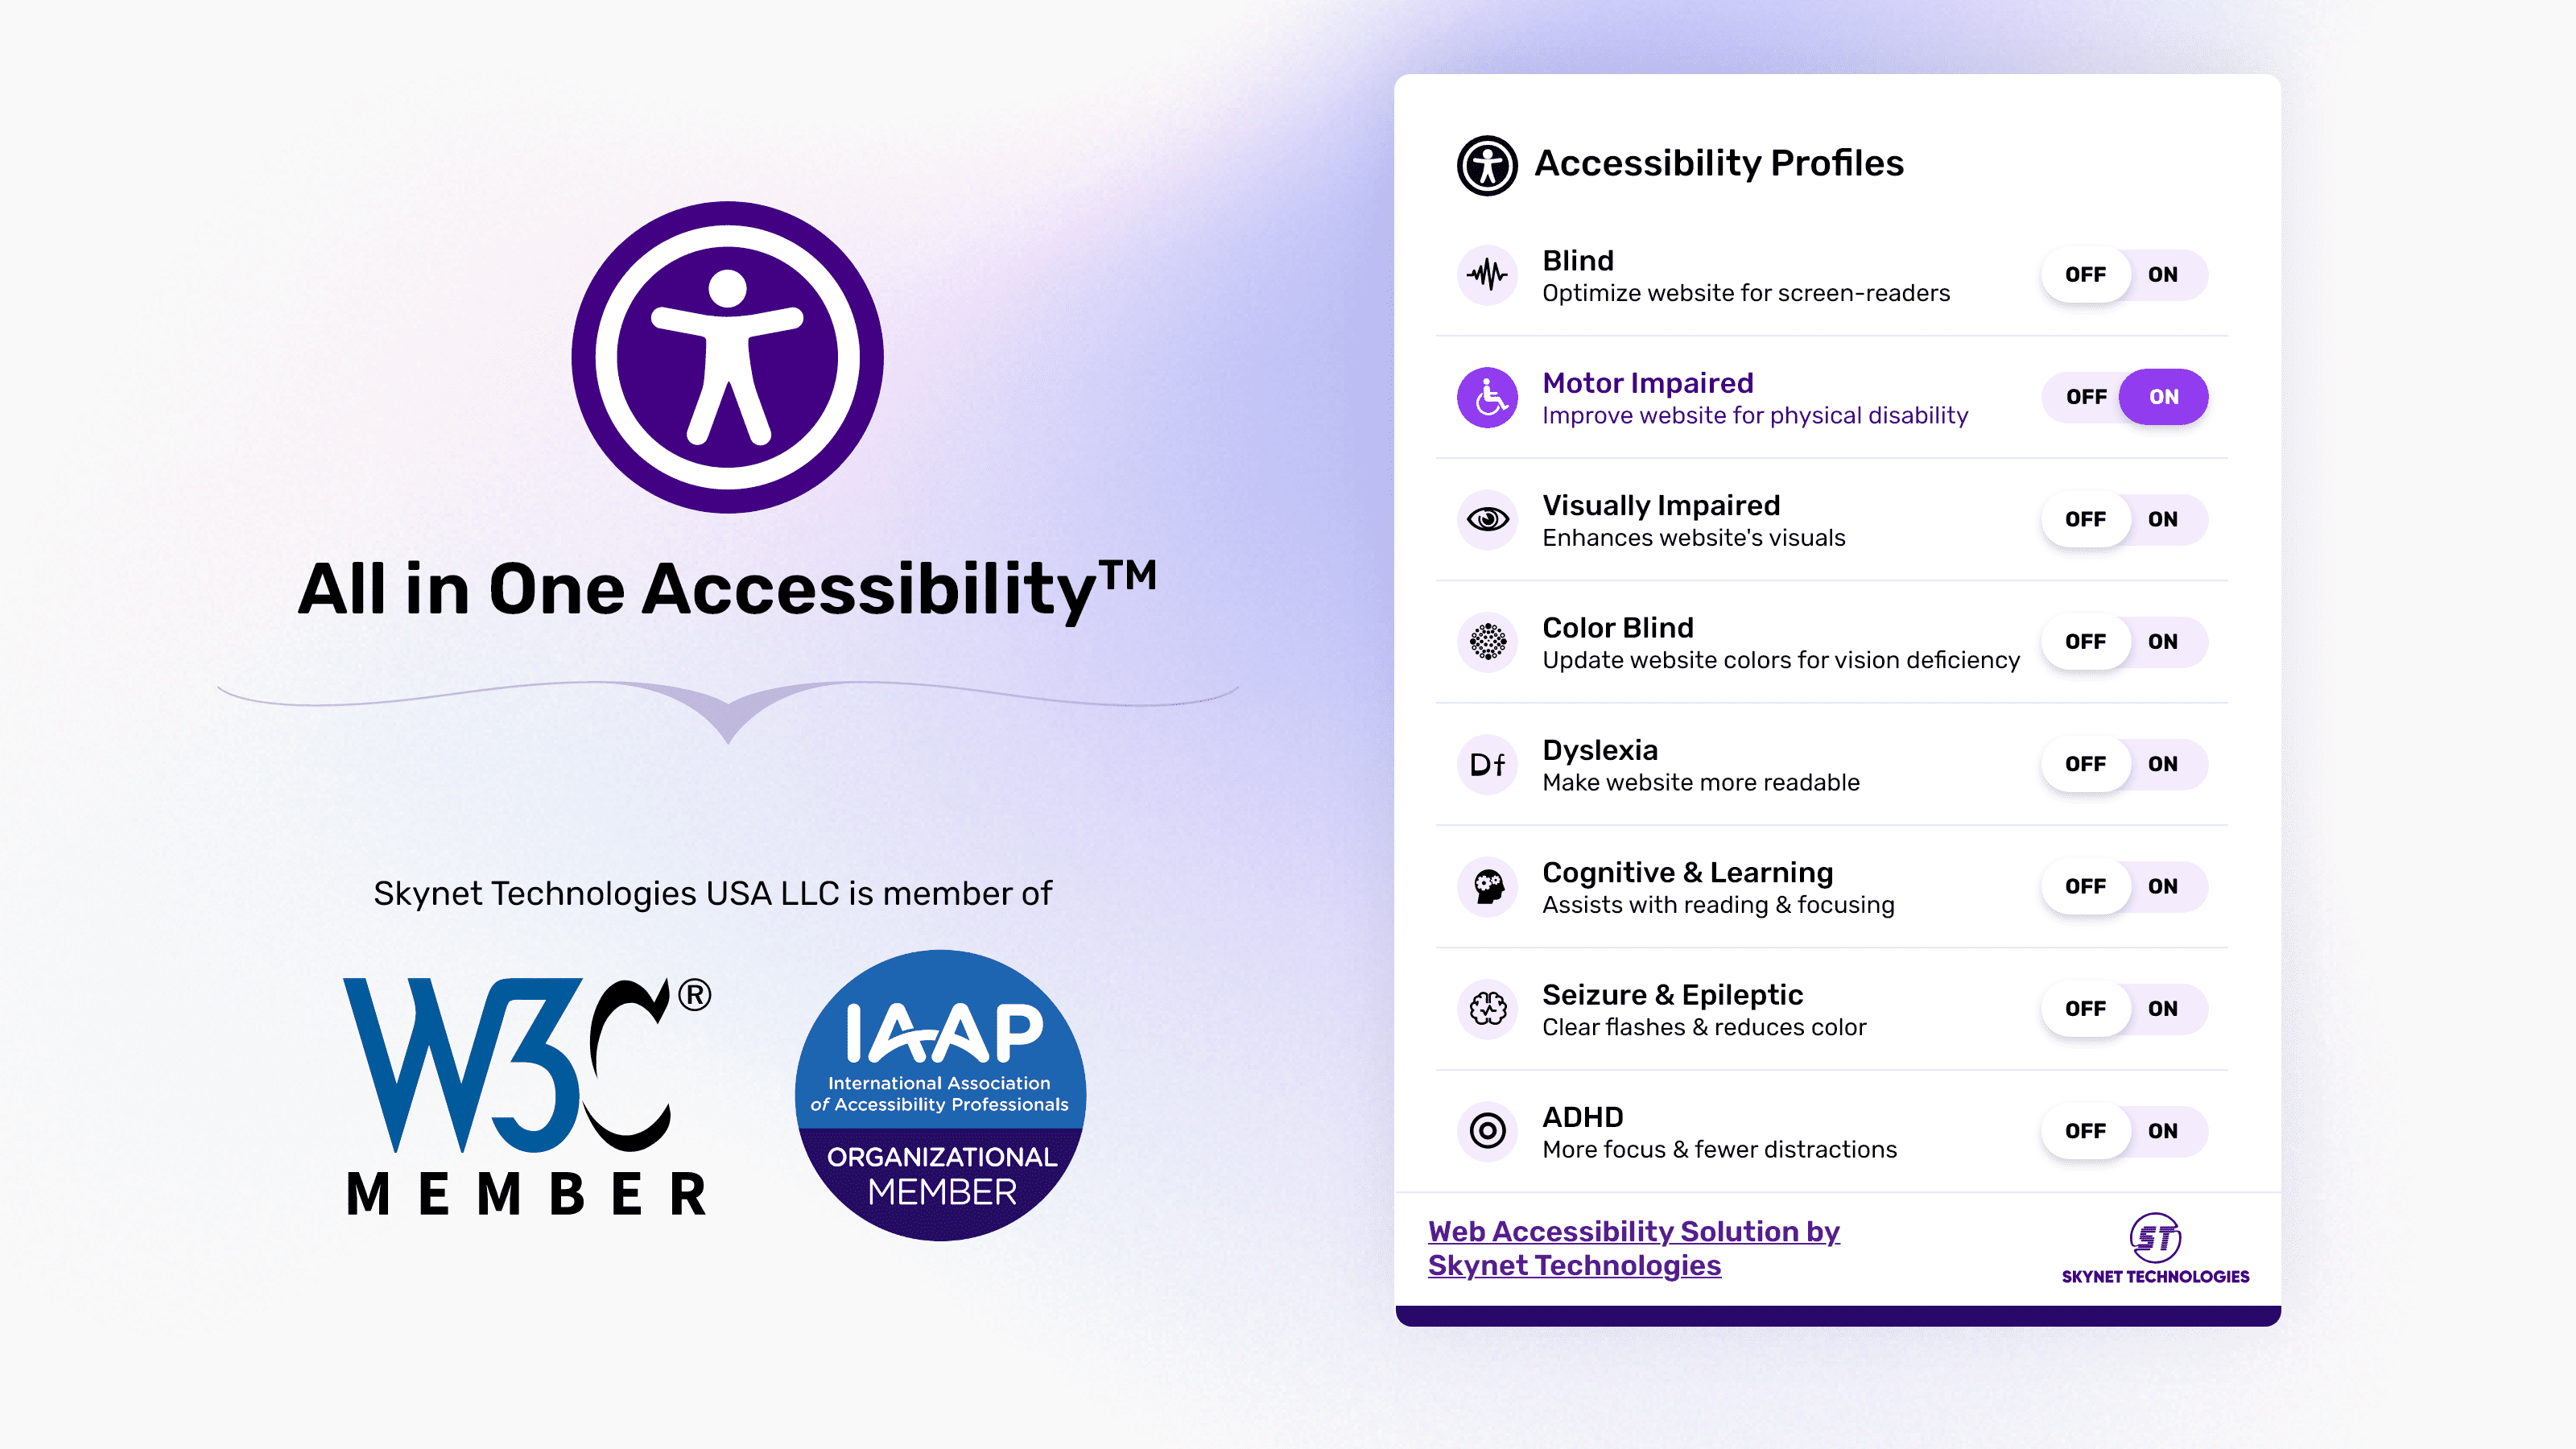 What is All in One Accessibility